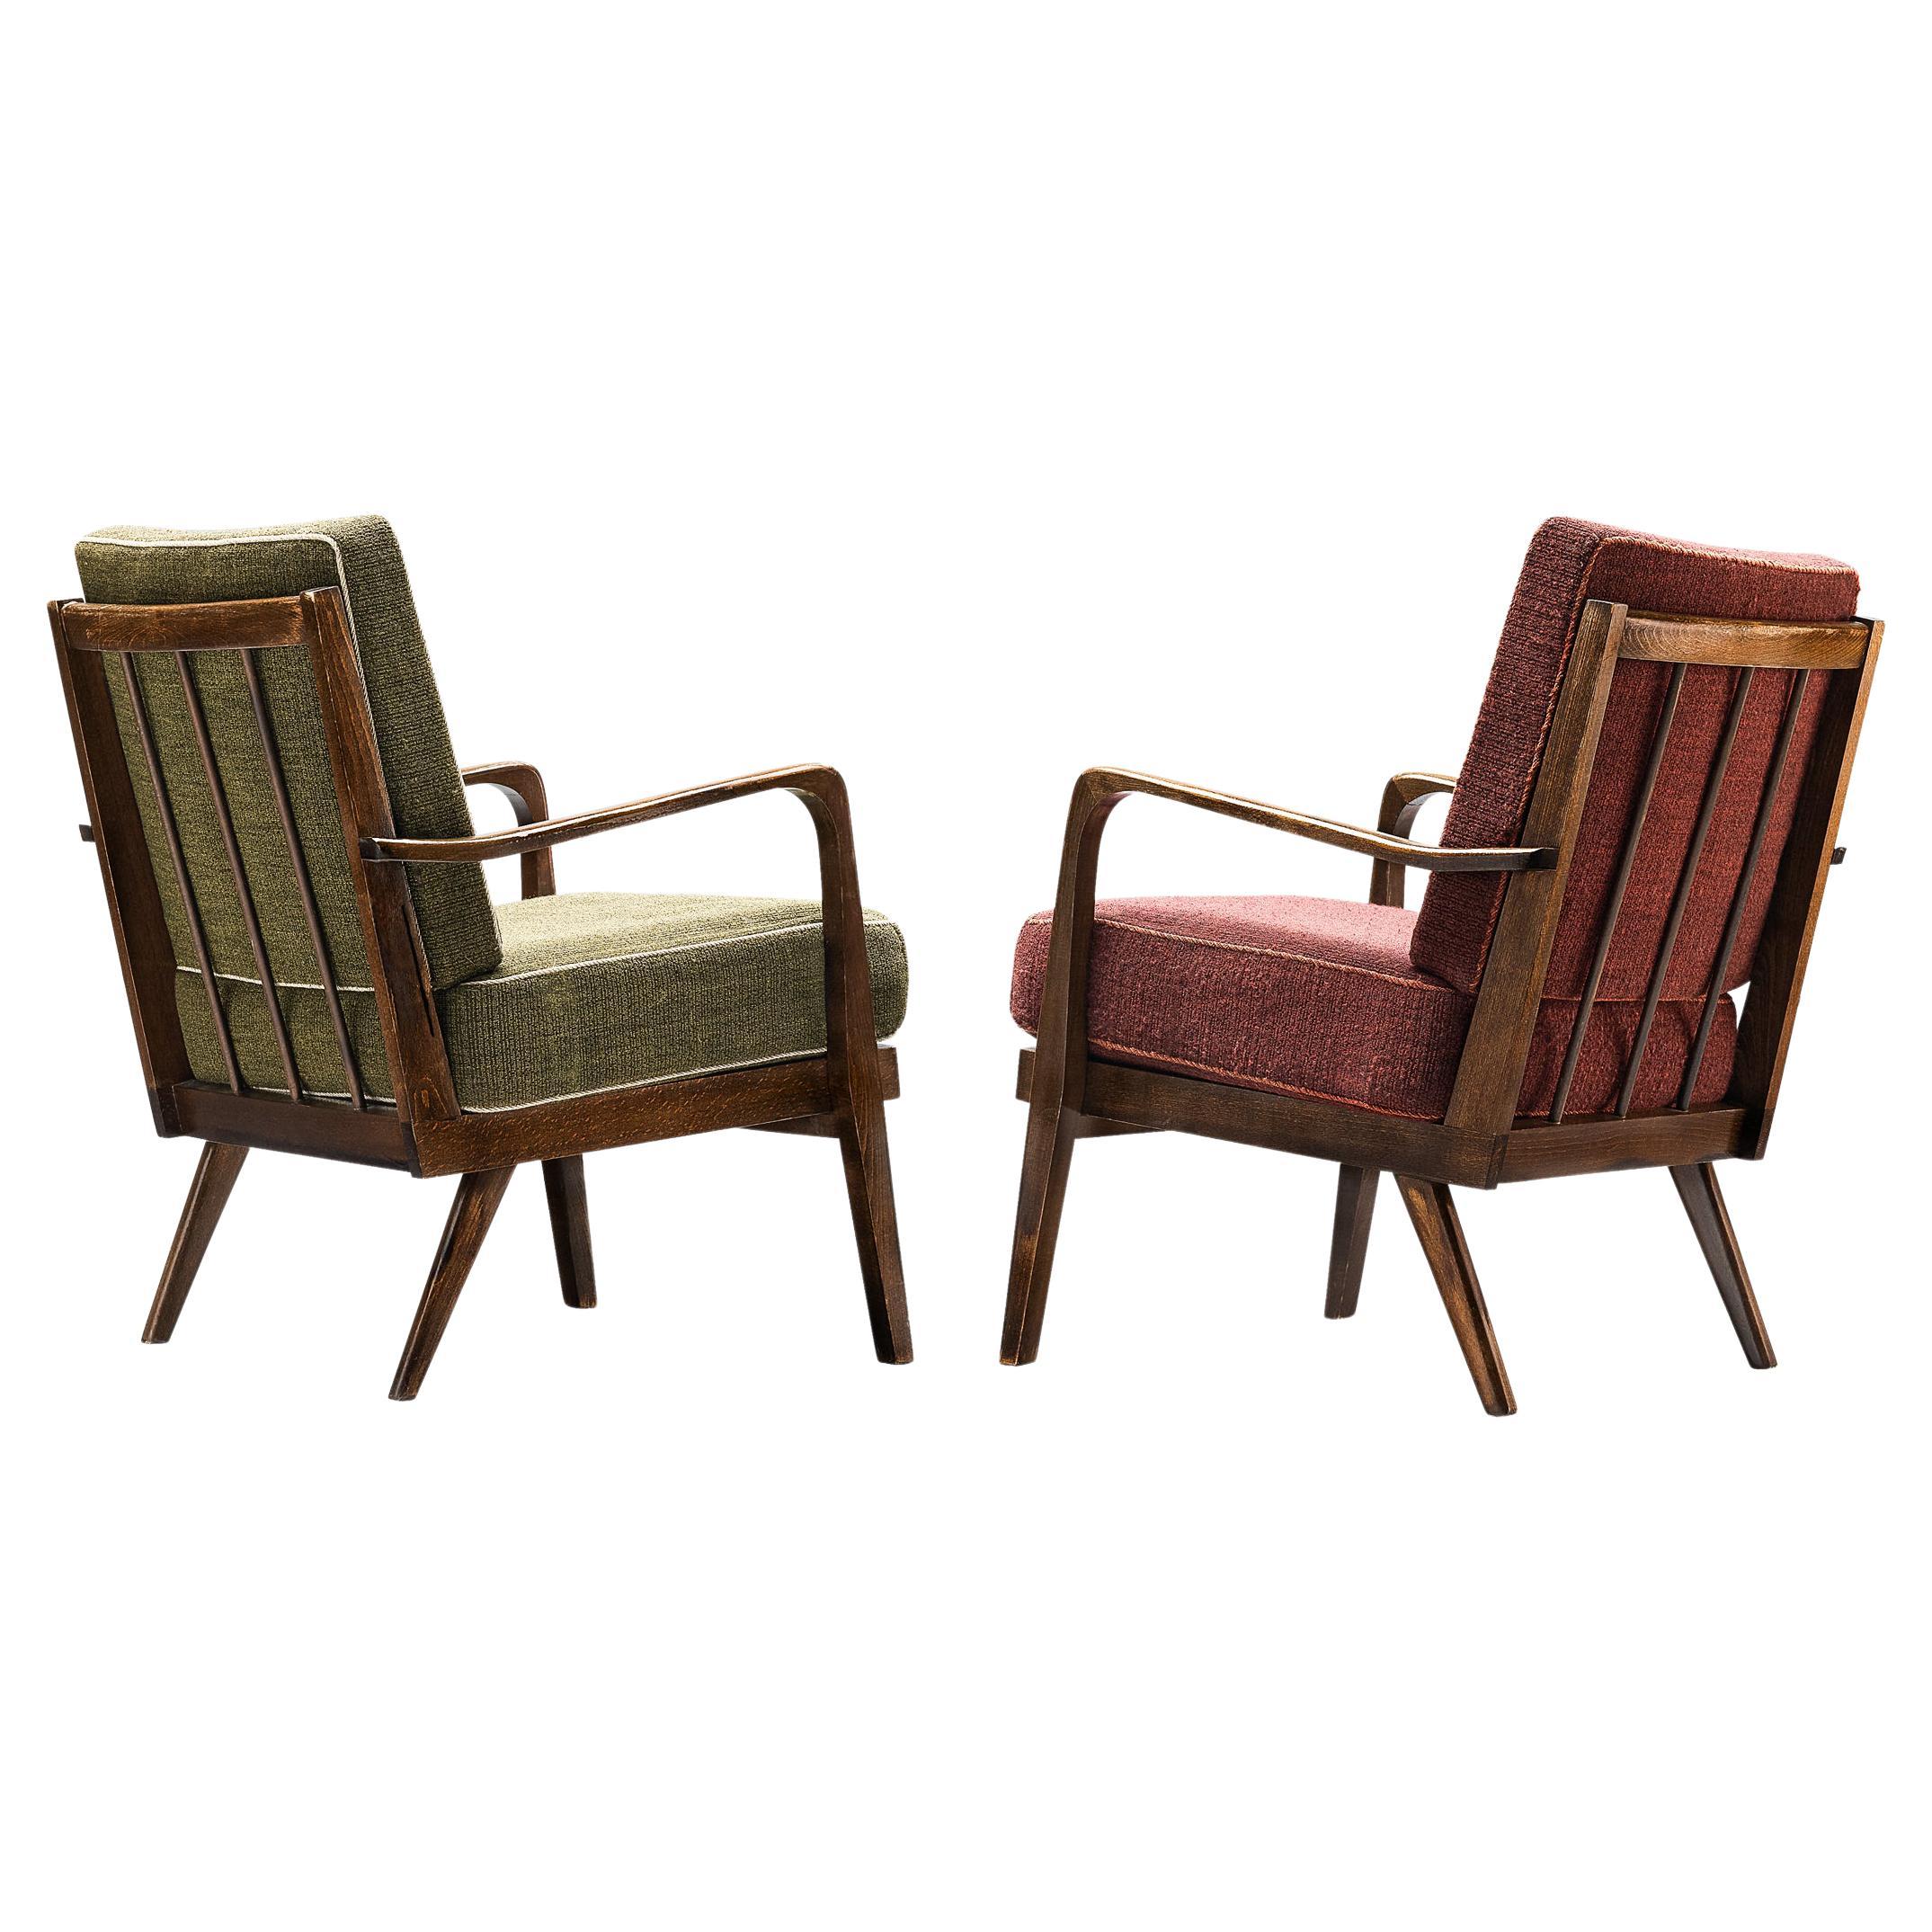 Danish Pair of Armchairs in Green and Burgundy Red Upholstery